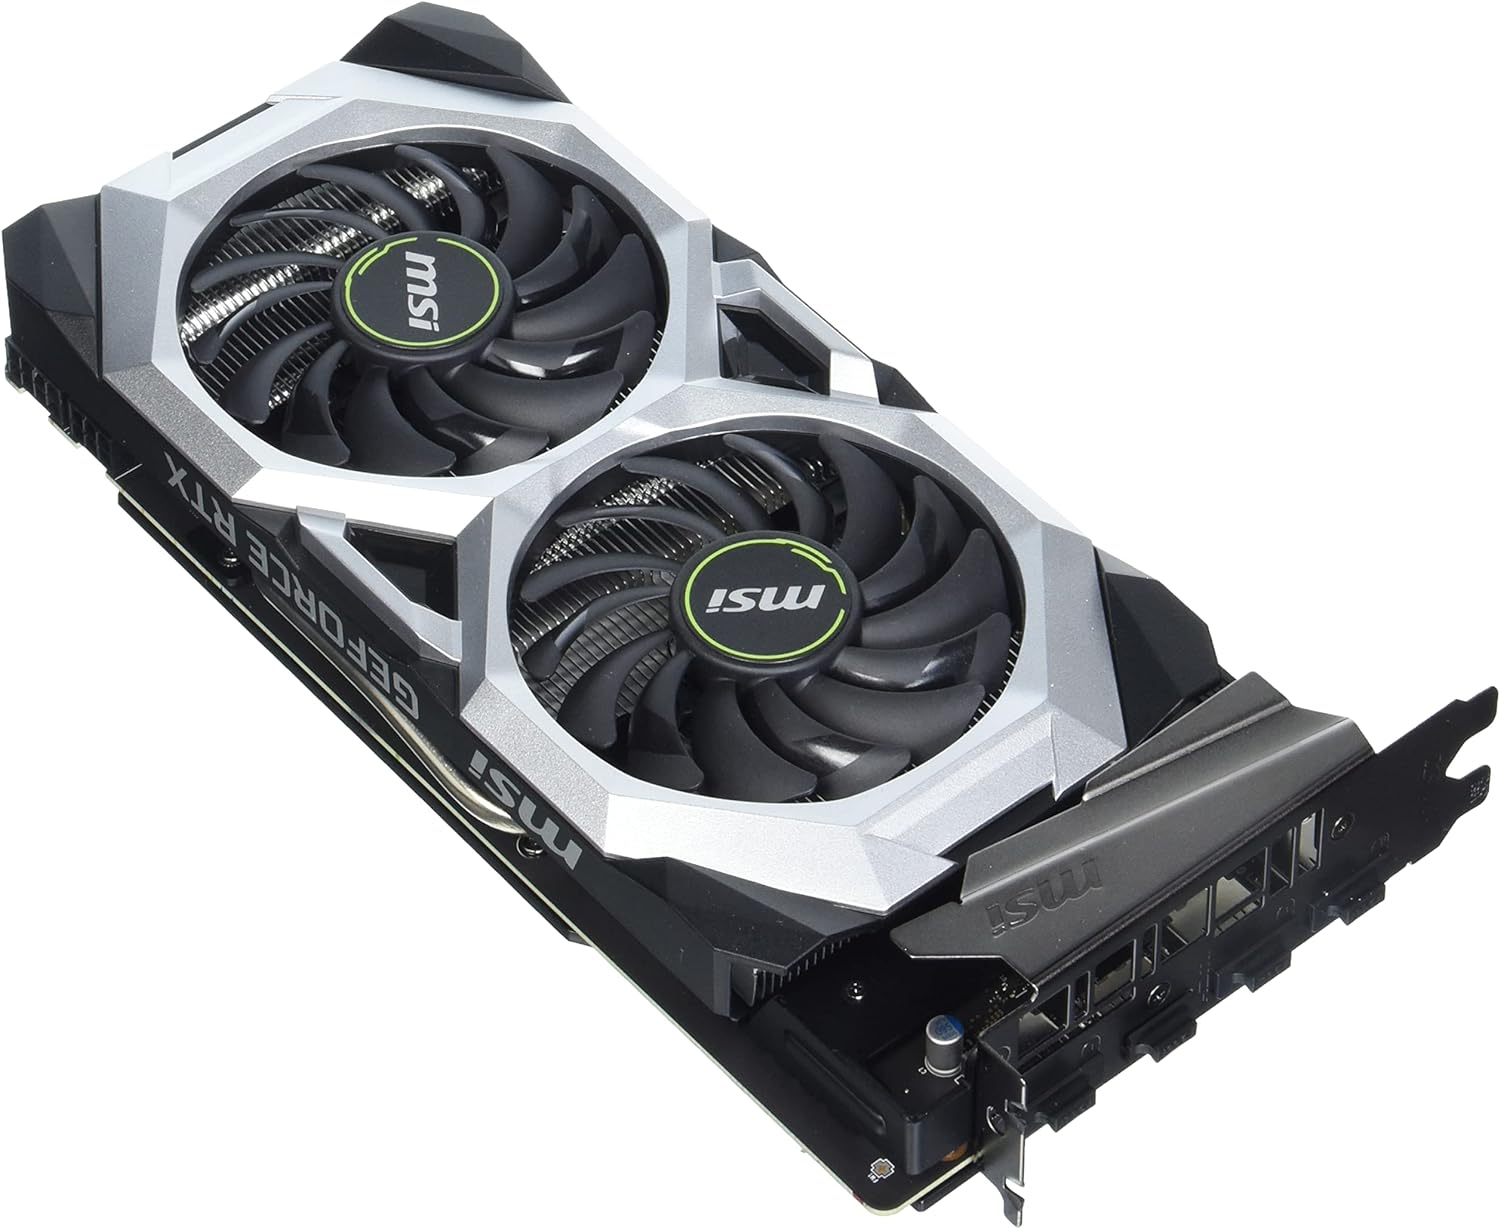 The Best Stable Diffusion GPU: Requirements, Benchmarks & Buying Guide